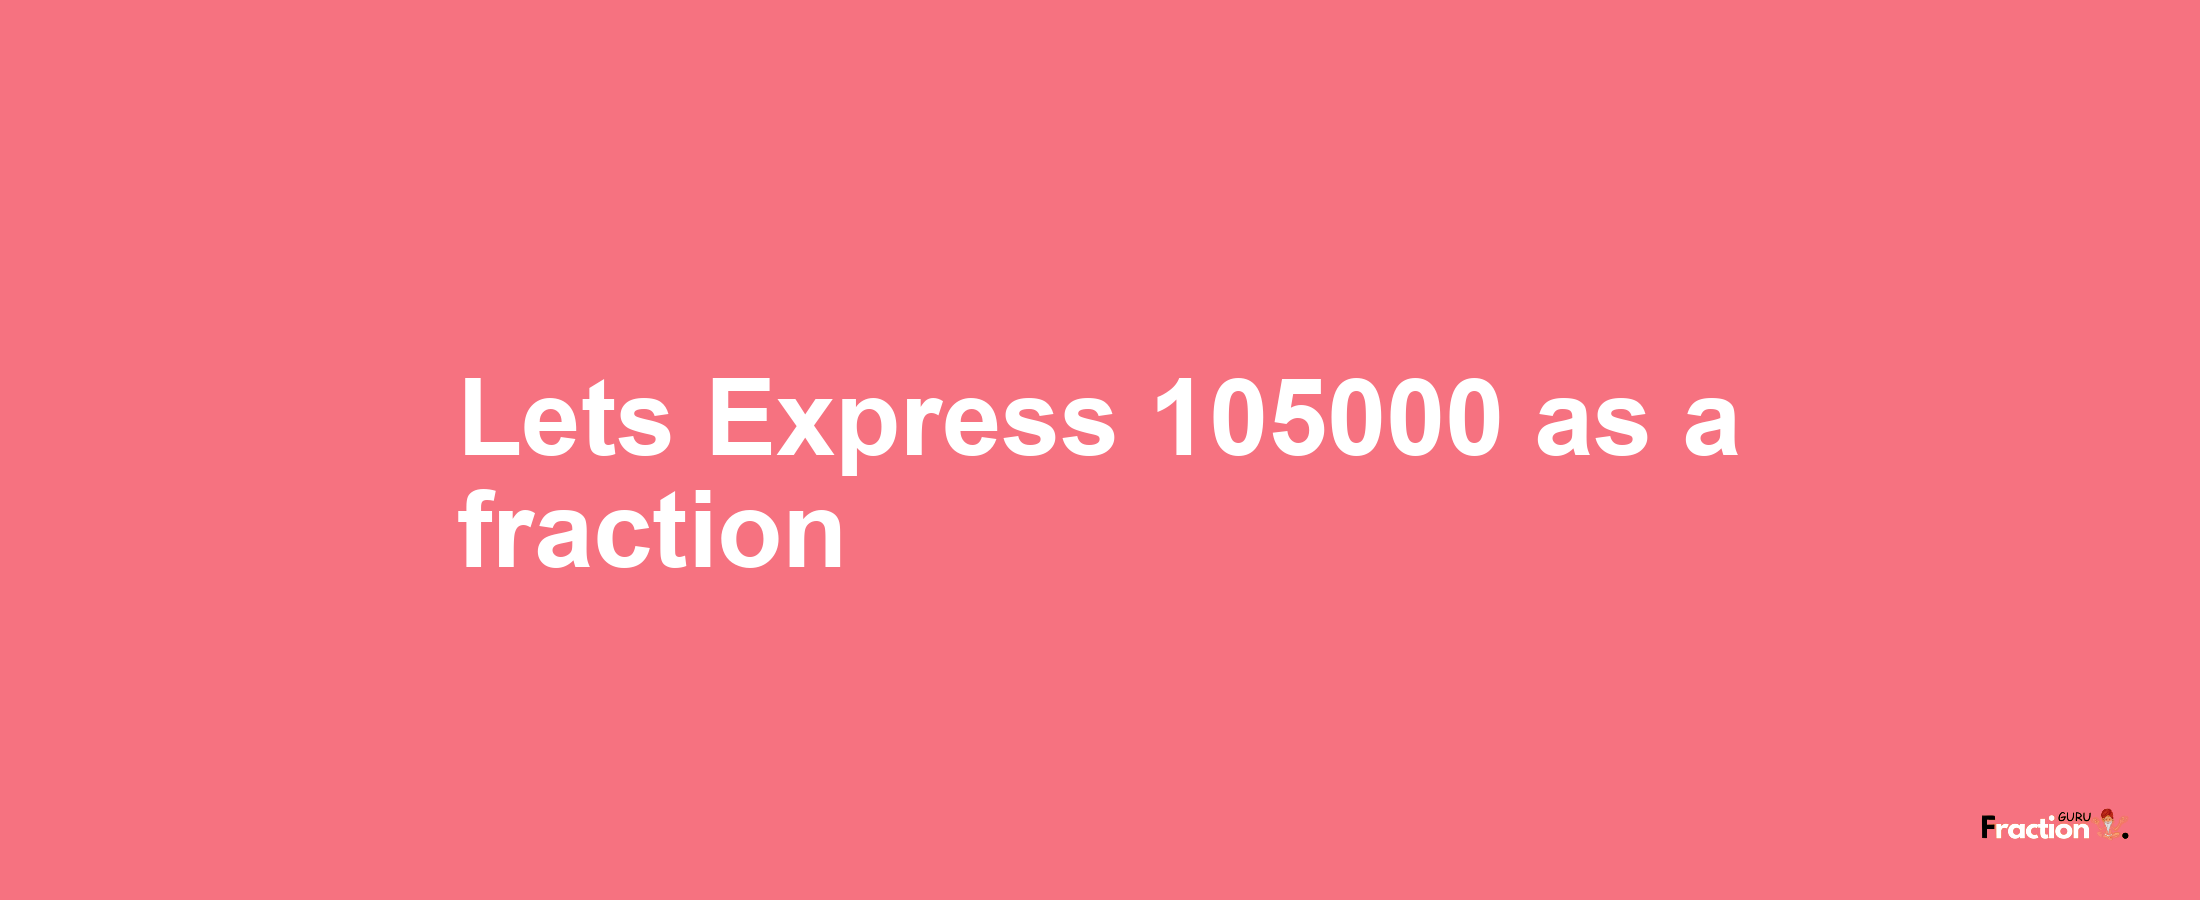 Lets Express 105000 as afraction